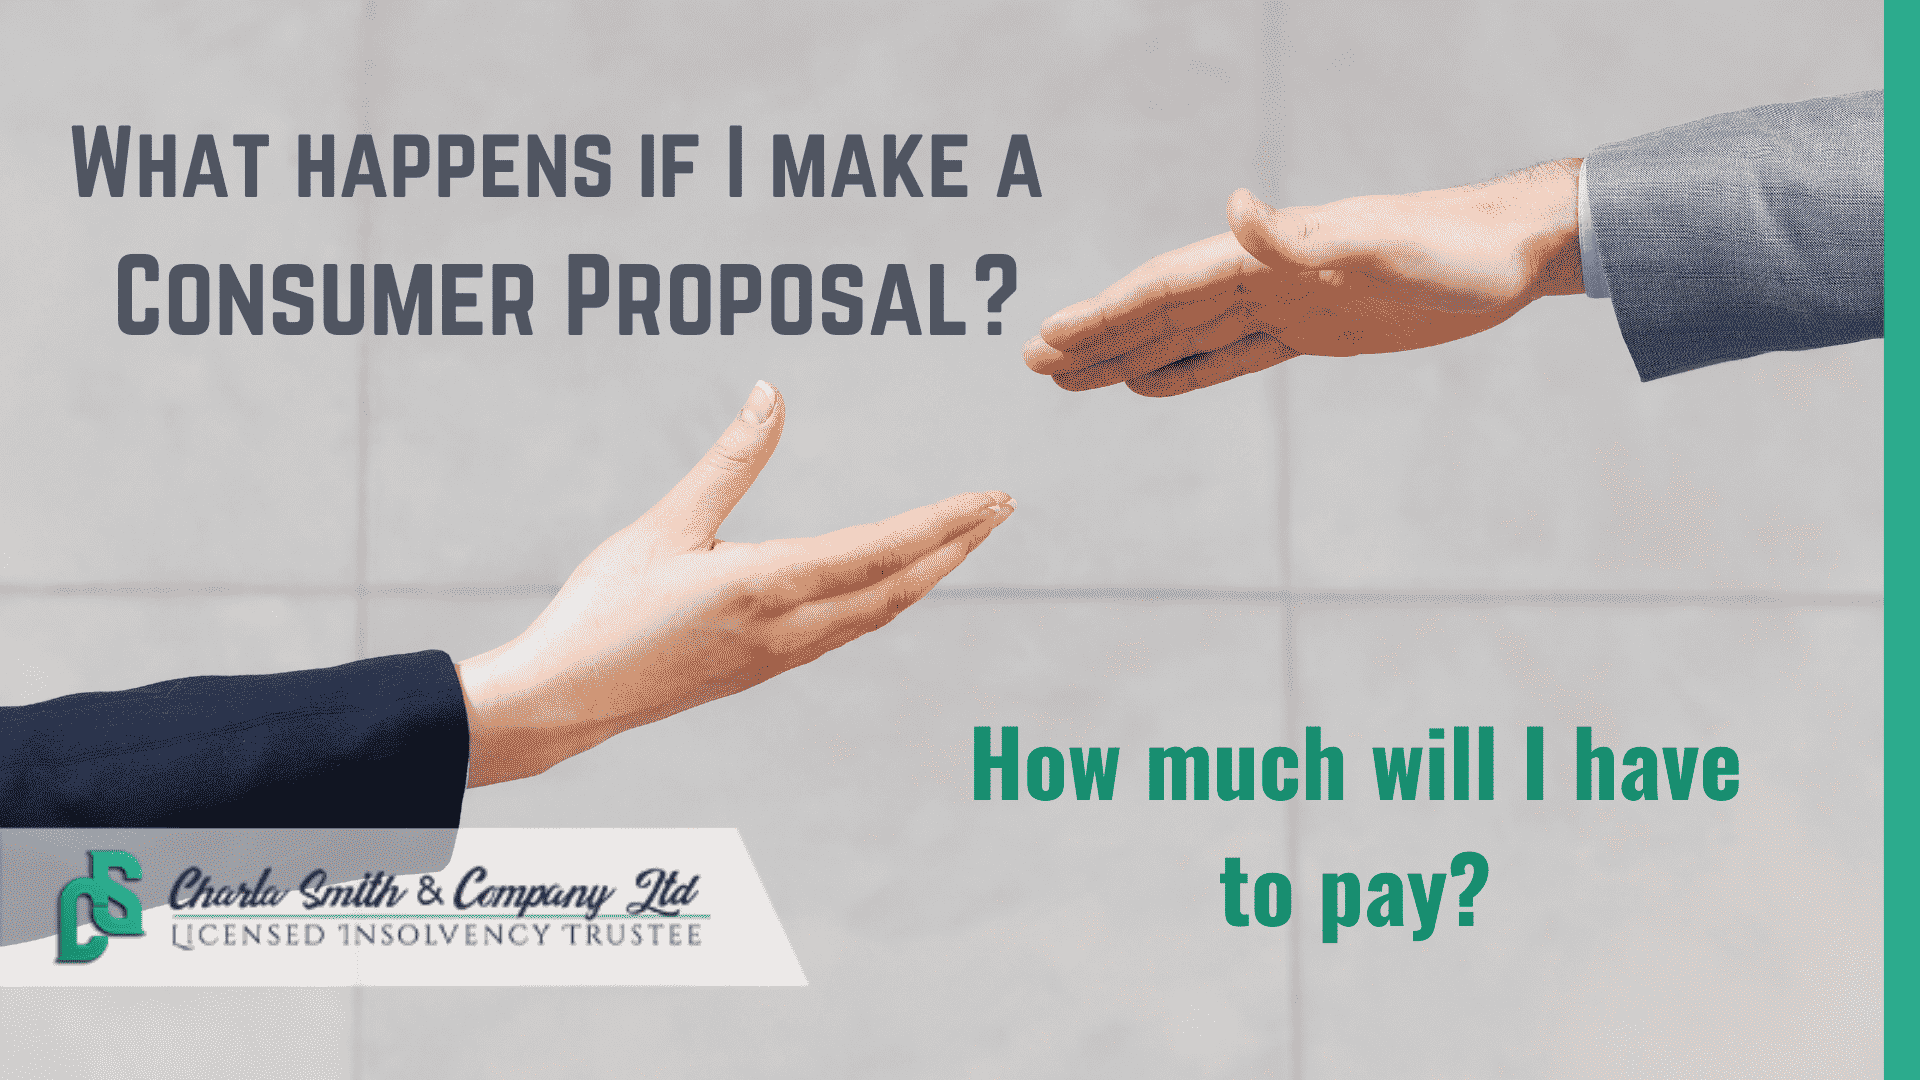 How much does a Consumer Proposal cost?